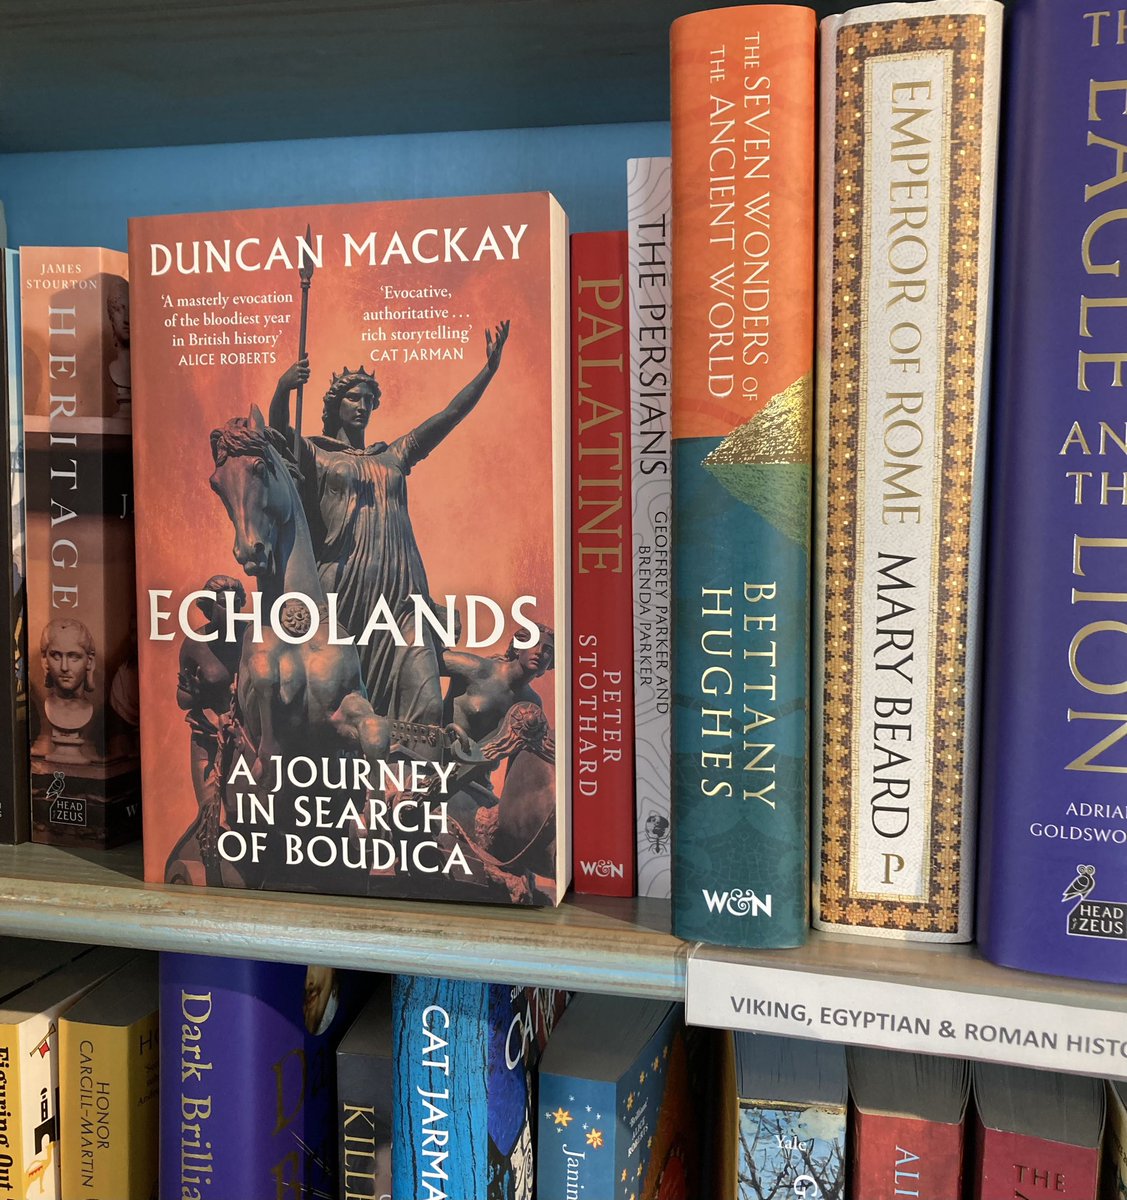 @theDuncanMackay happy to report you’re on the shelf amongst some real behemoths in Aldeburgh!